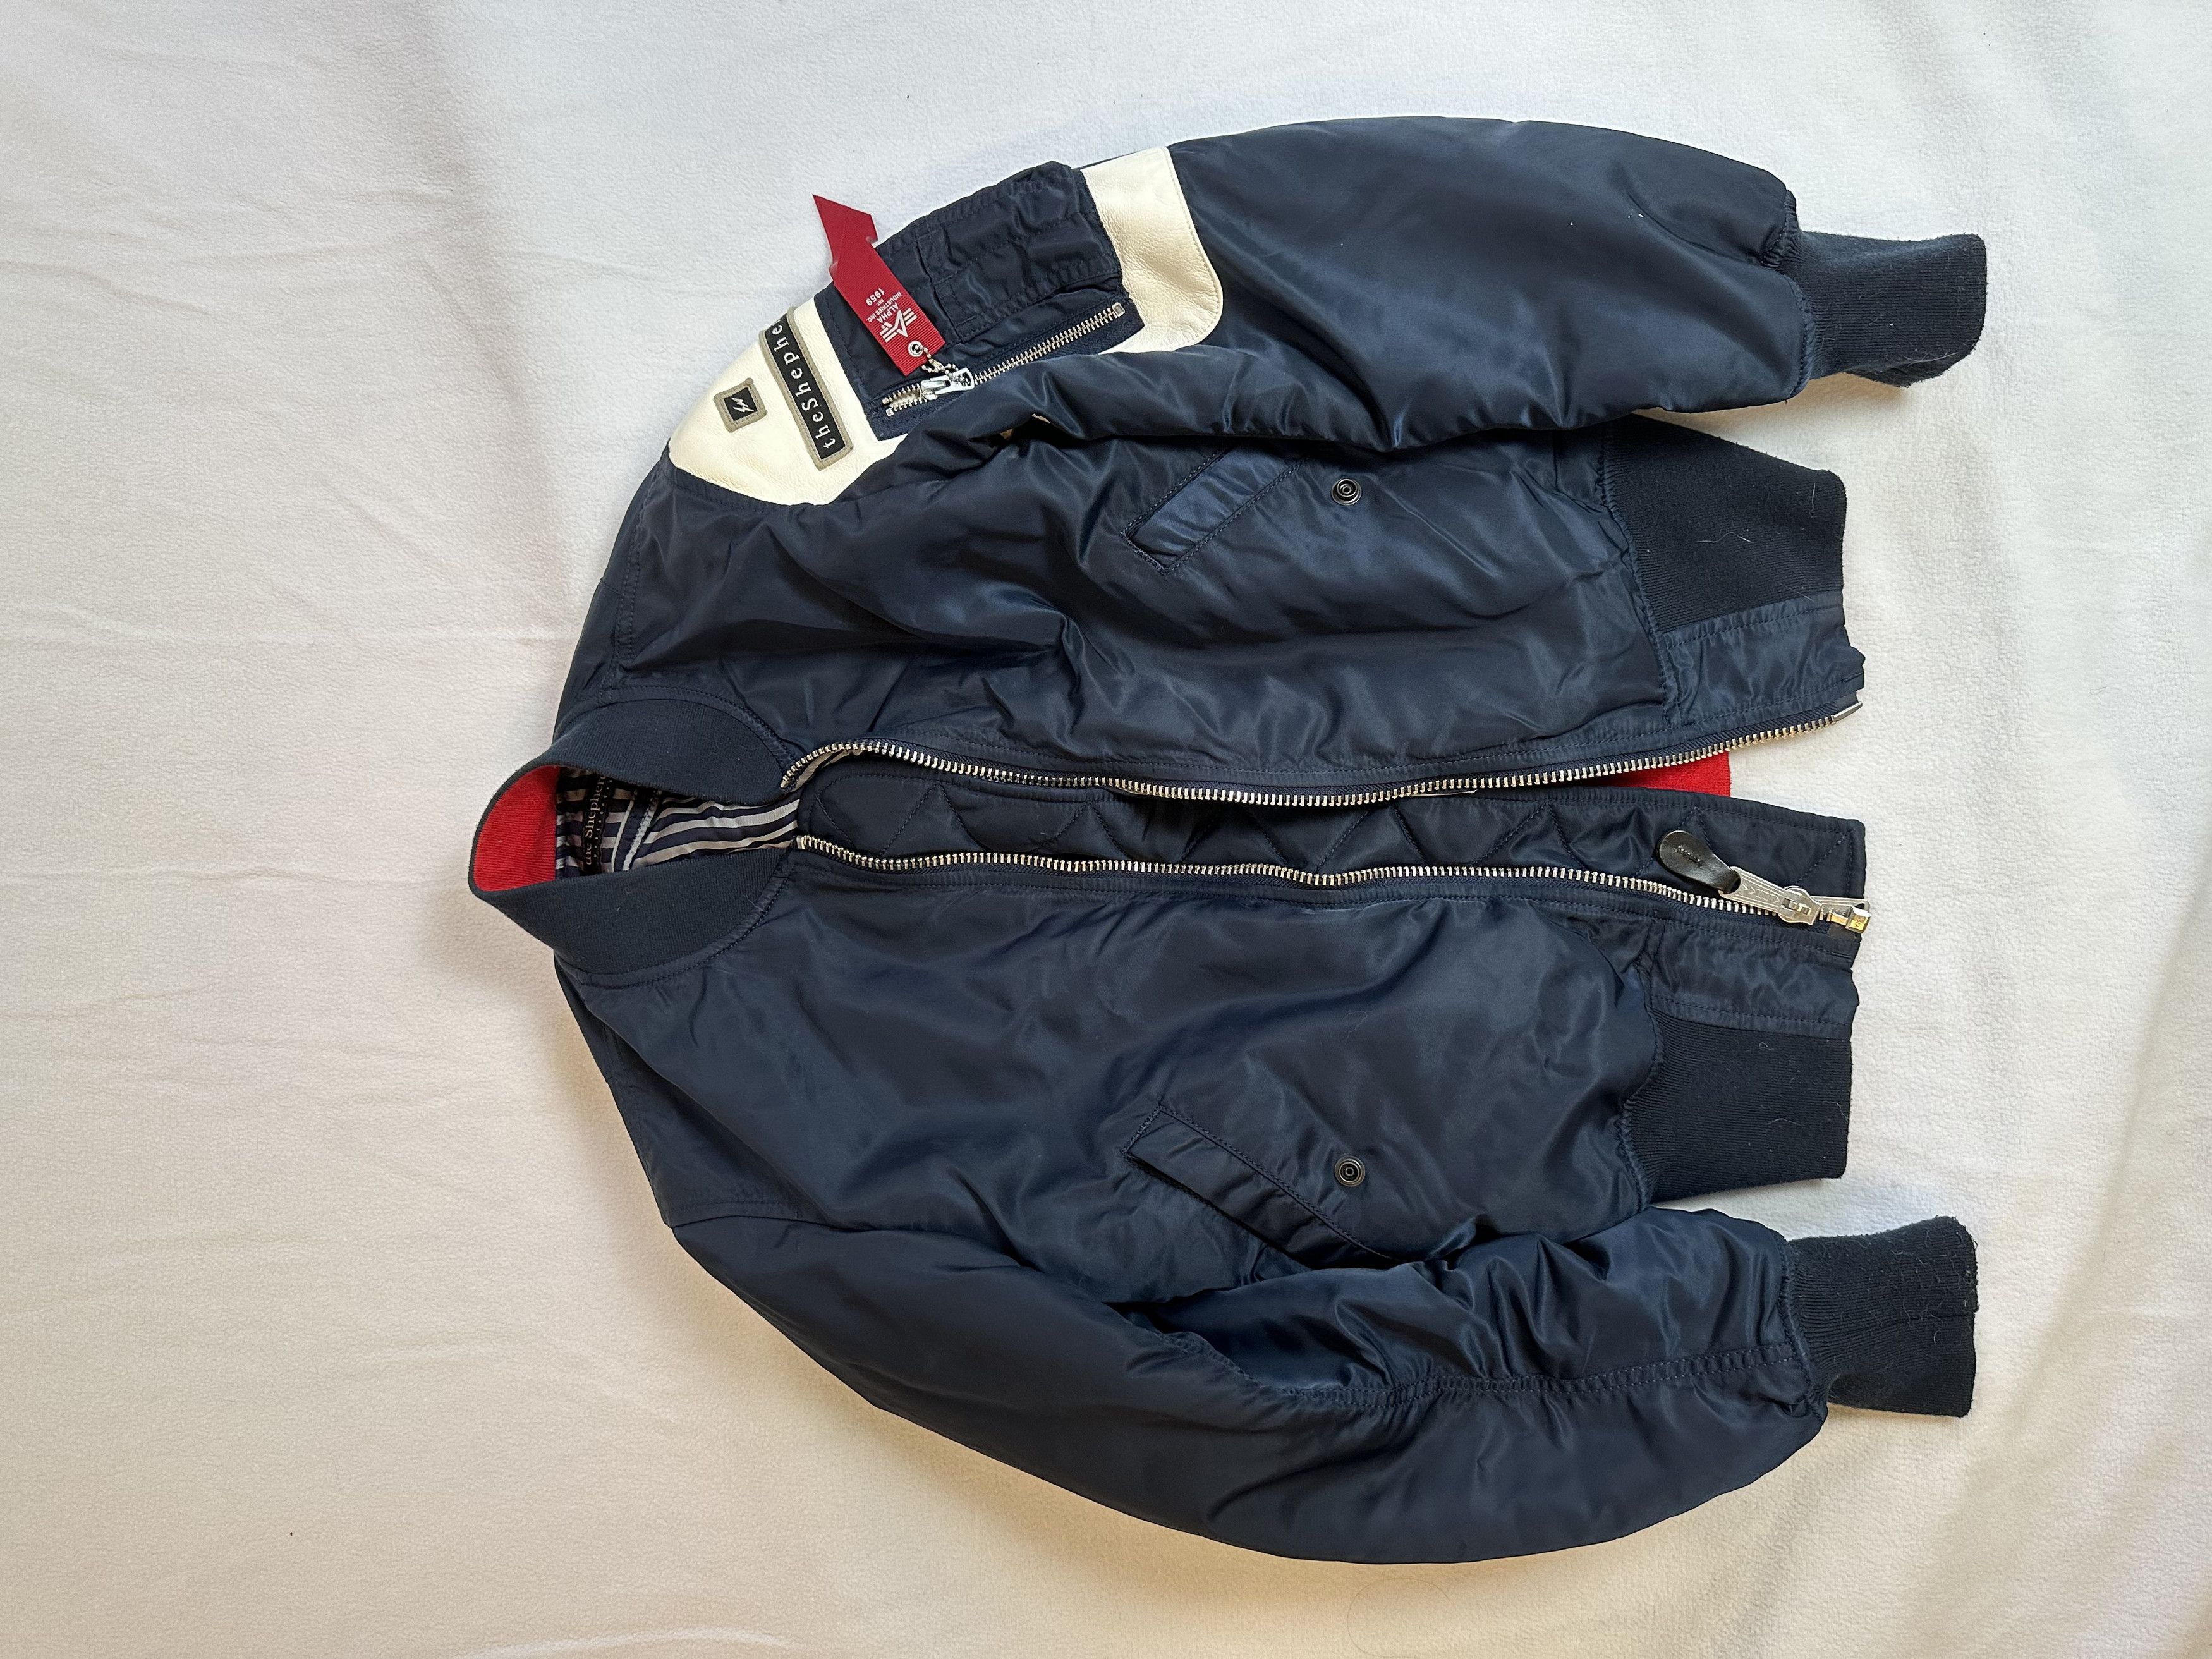 Undercover Undercover PARKing Ginza Bomber | Grailed